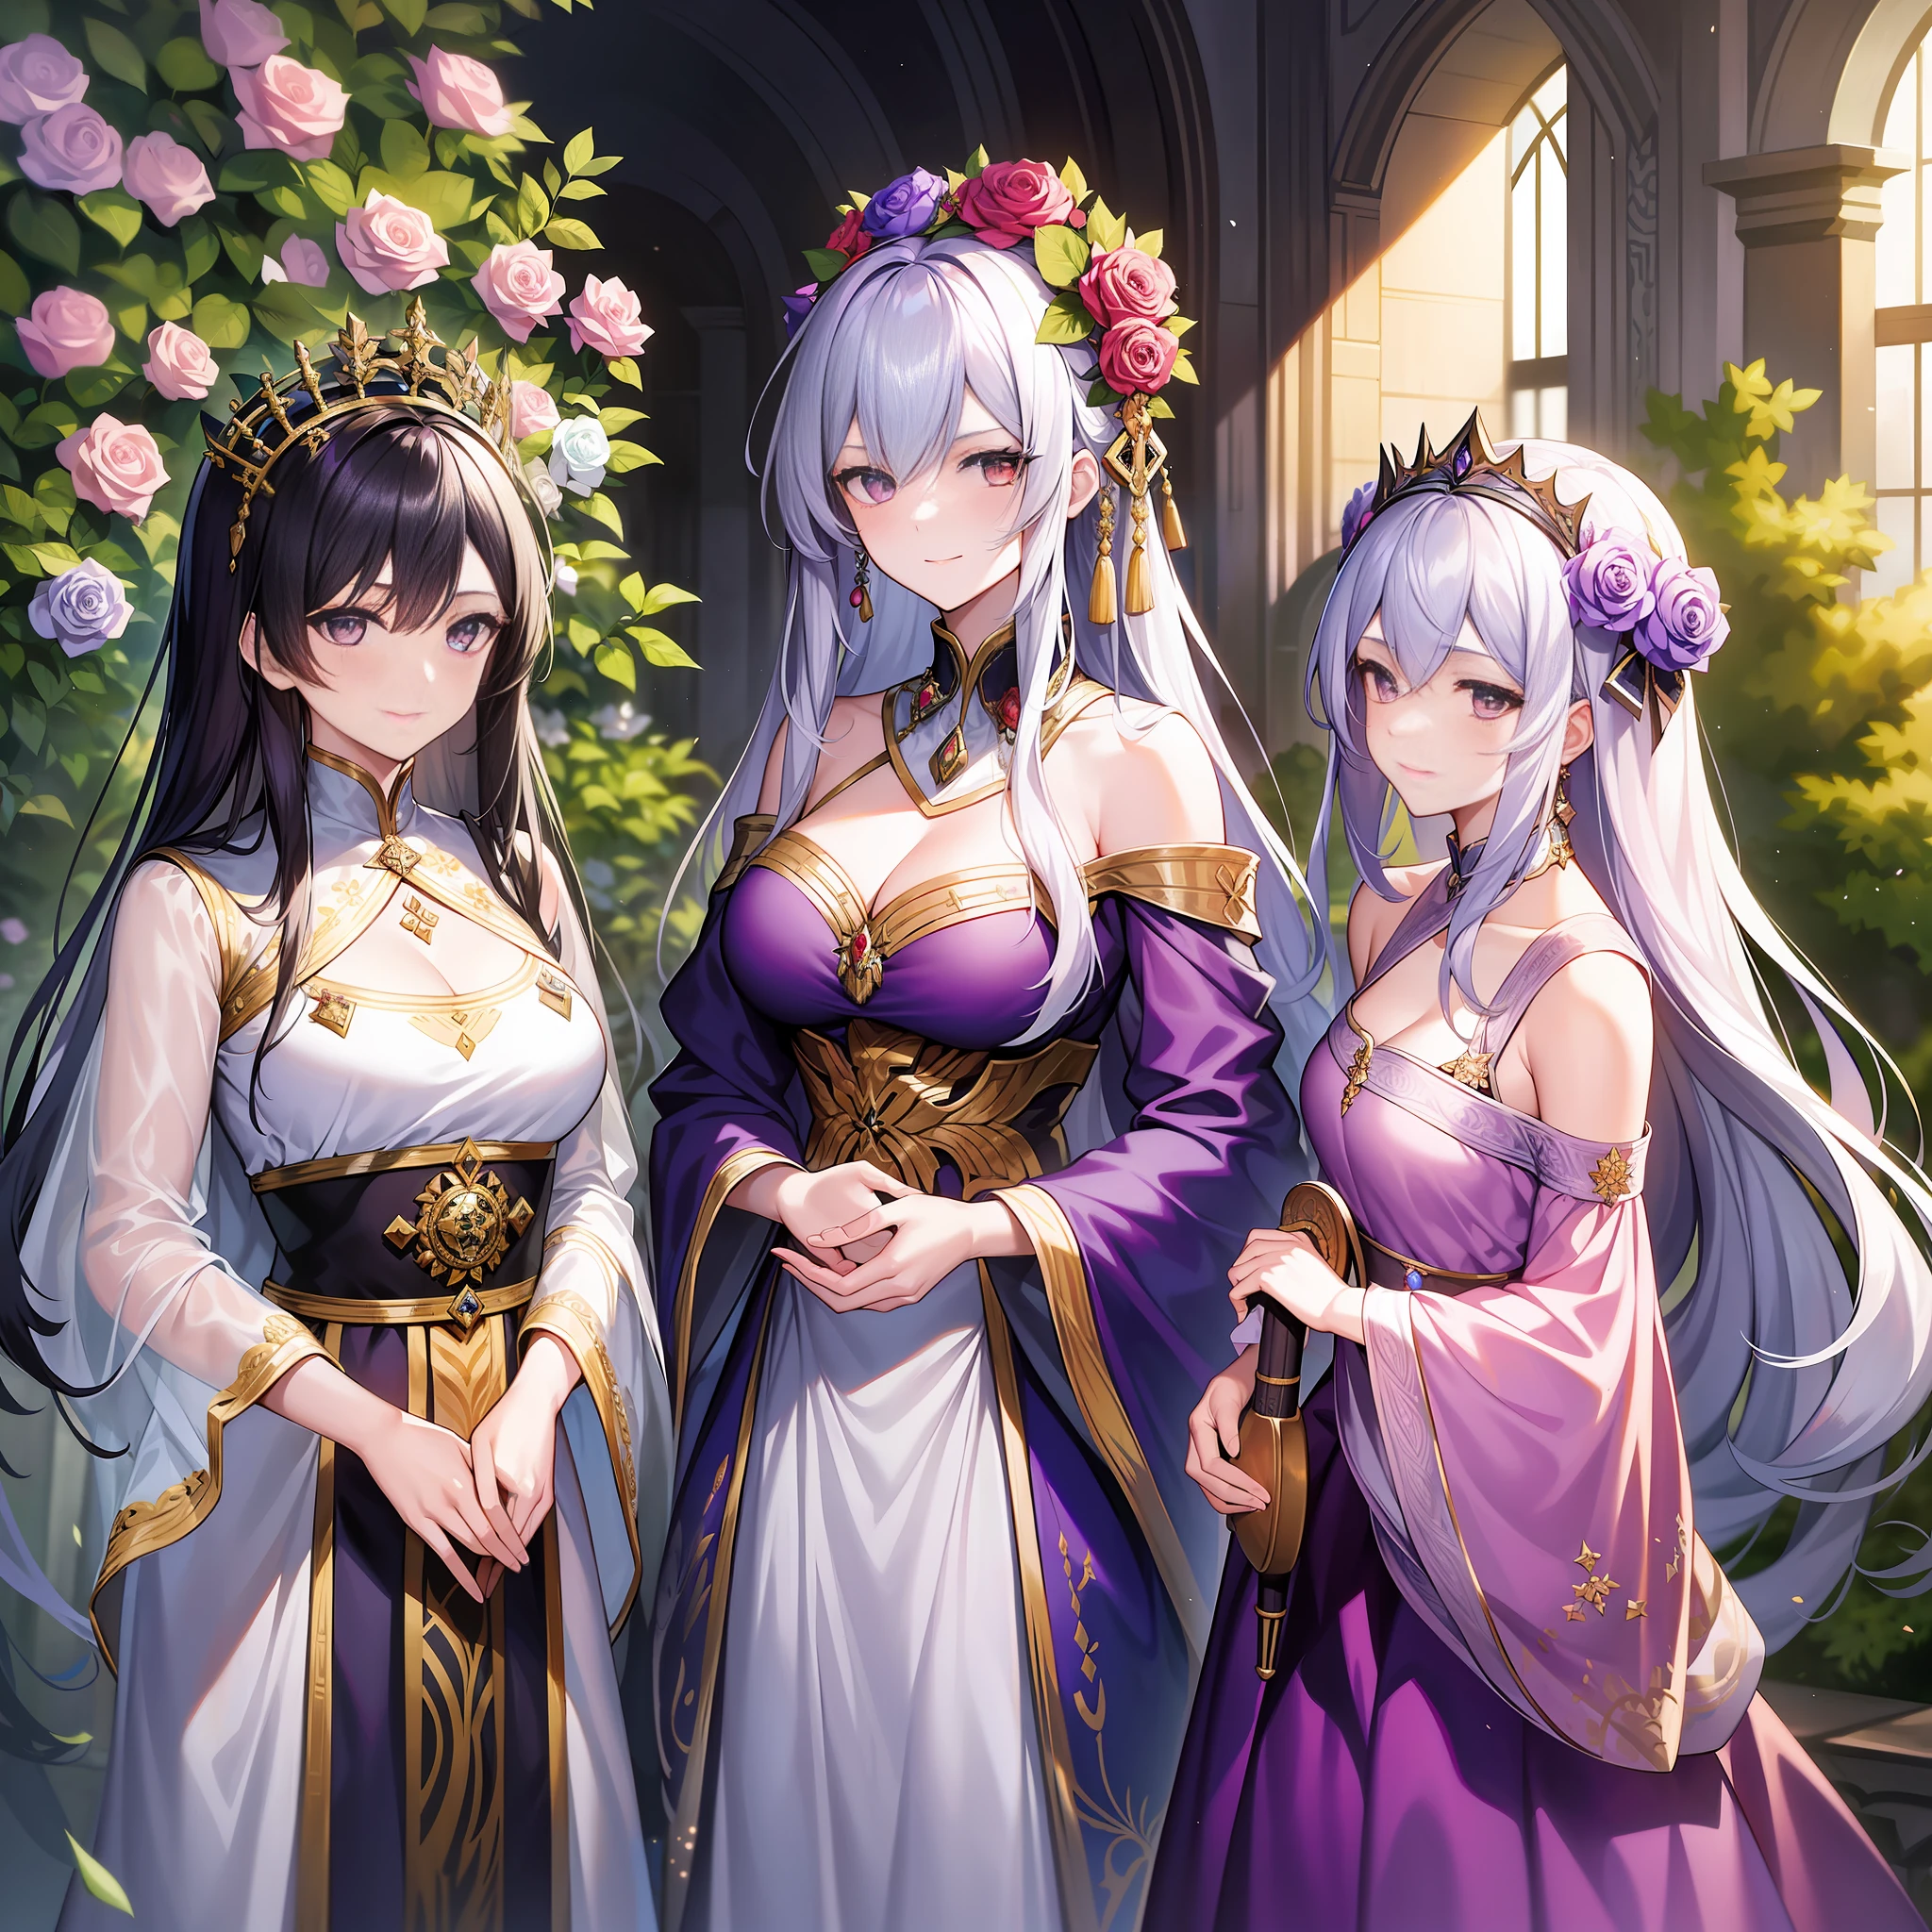 In a palace, three female emperors stood angrily side by side, among which the black-haired female emperor wore a silver shawl, her gaze firm; The white-haired emperor wore a delicate white long dress and a headdress of red rose flowers, her smile was gentle, and she held a book in her hand; The purple-haired female emperor wore a light purple dress with an emerald green flower on her head, her eyes were deep, and she held a violin in her hand.